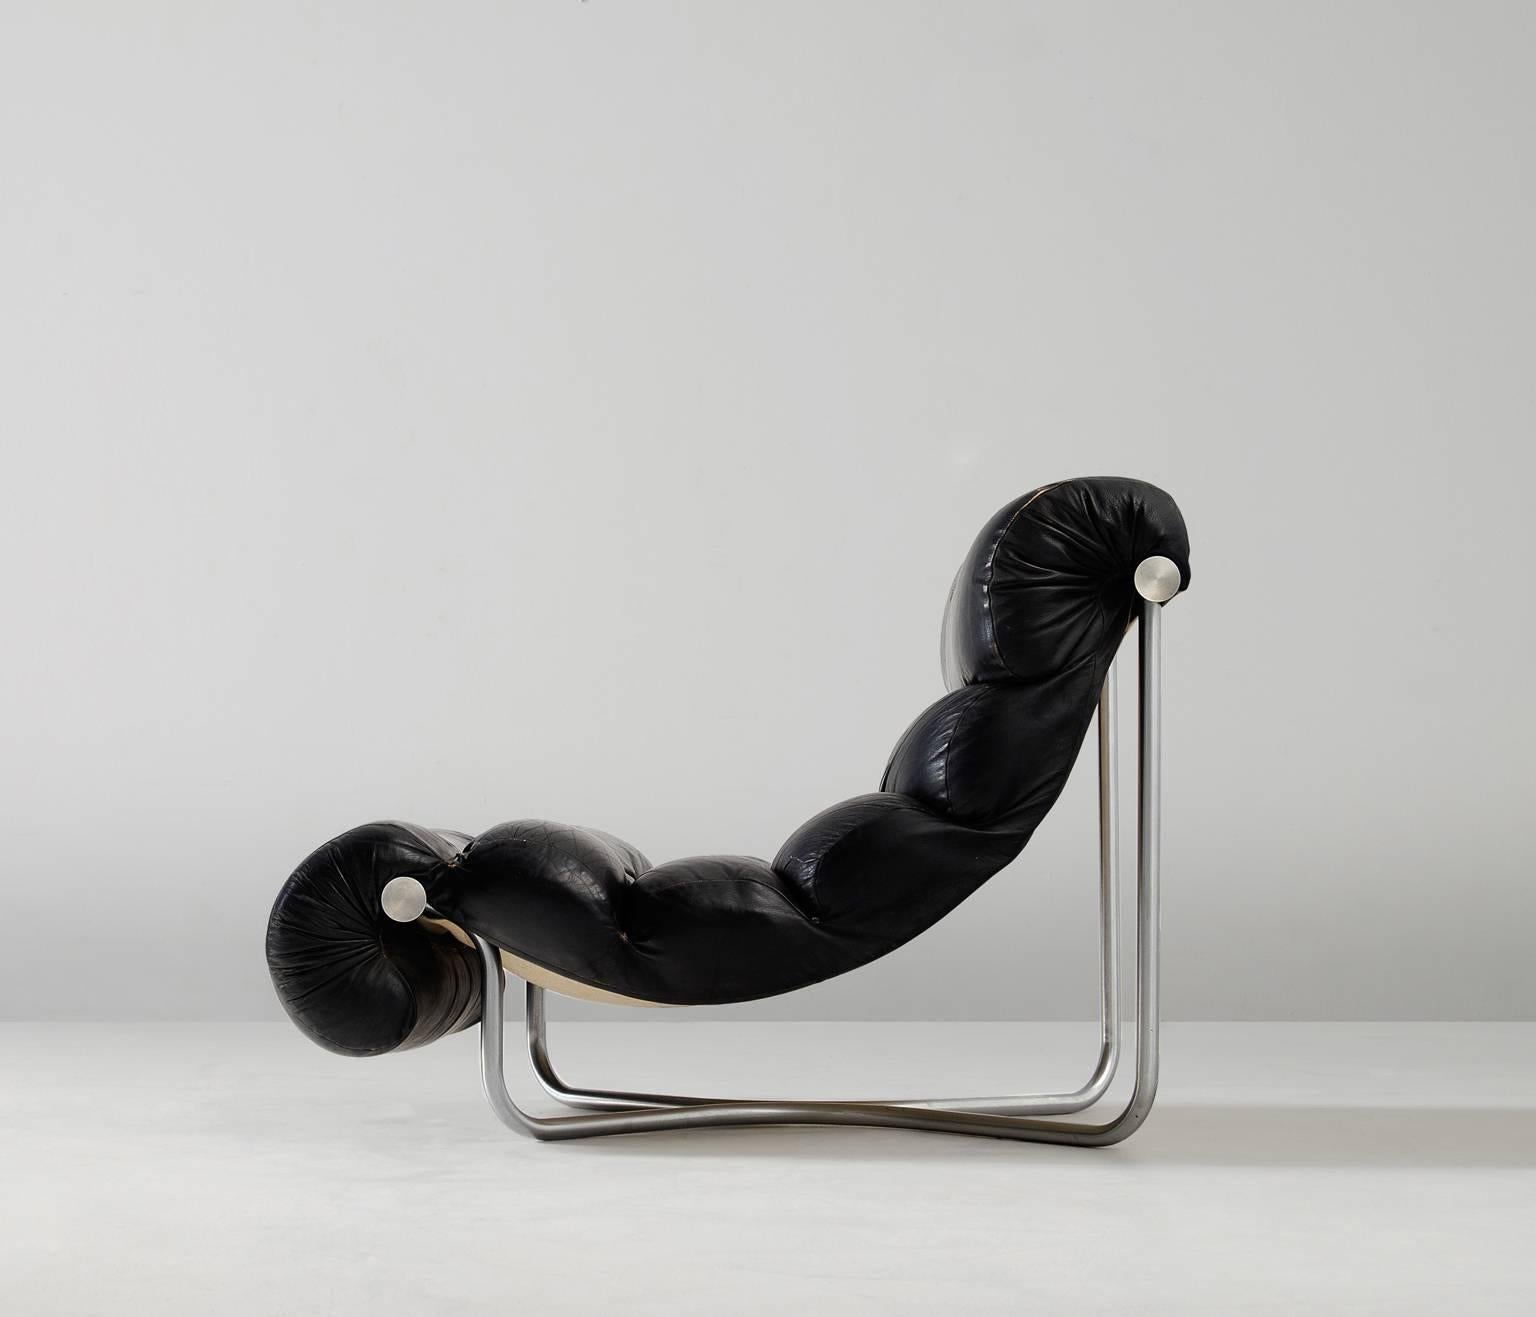 Mid-Century Modern Georges Van Rijck Lounge Chair in Black Leather and Chrome, Belgium, 1972